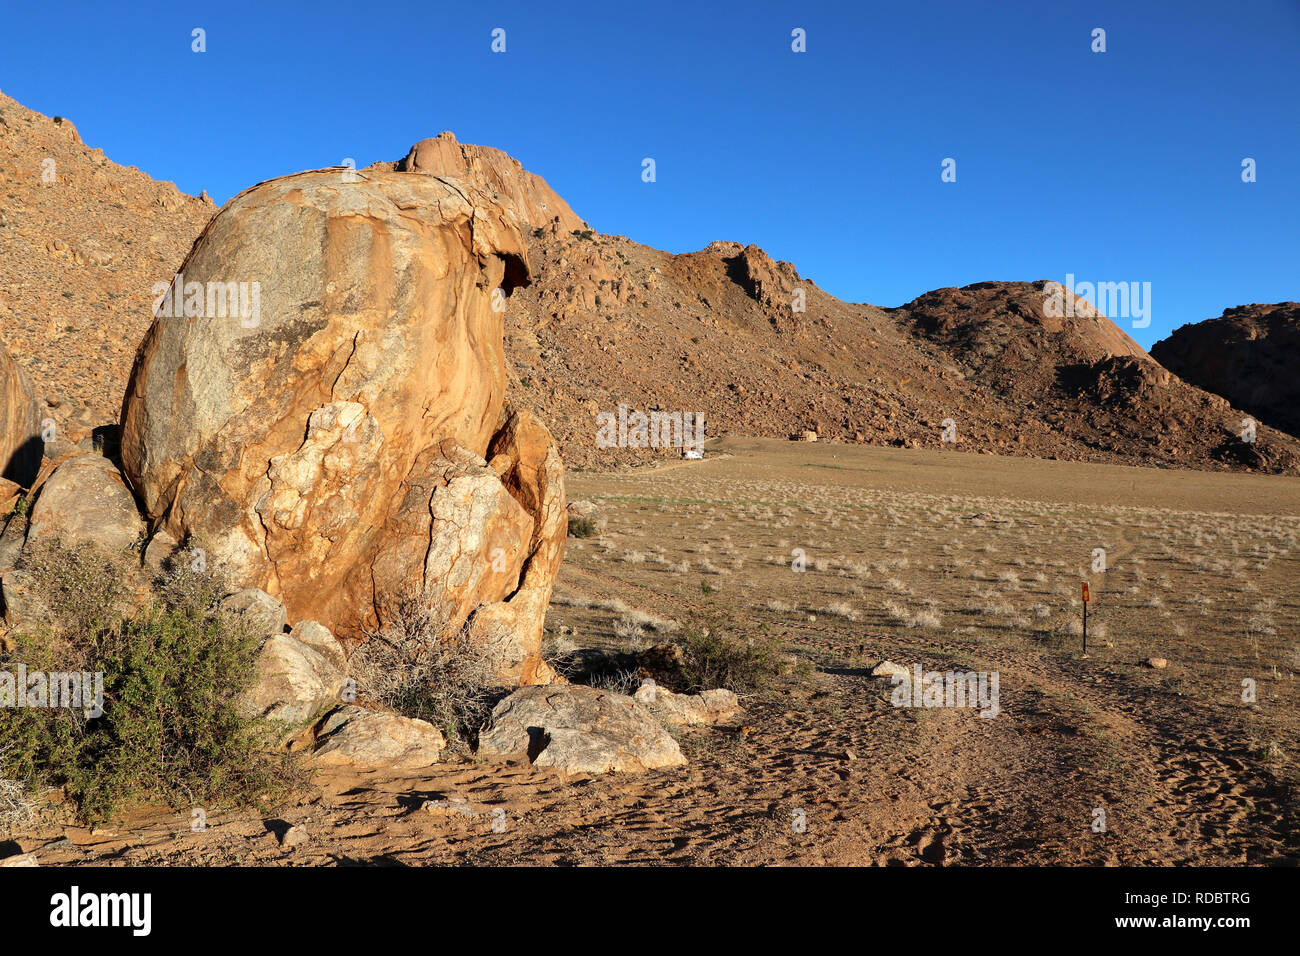 Rock with a view of the desert (eagle nest) and the mountains of Namibia Stock Photo